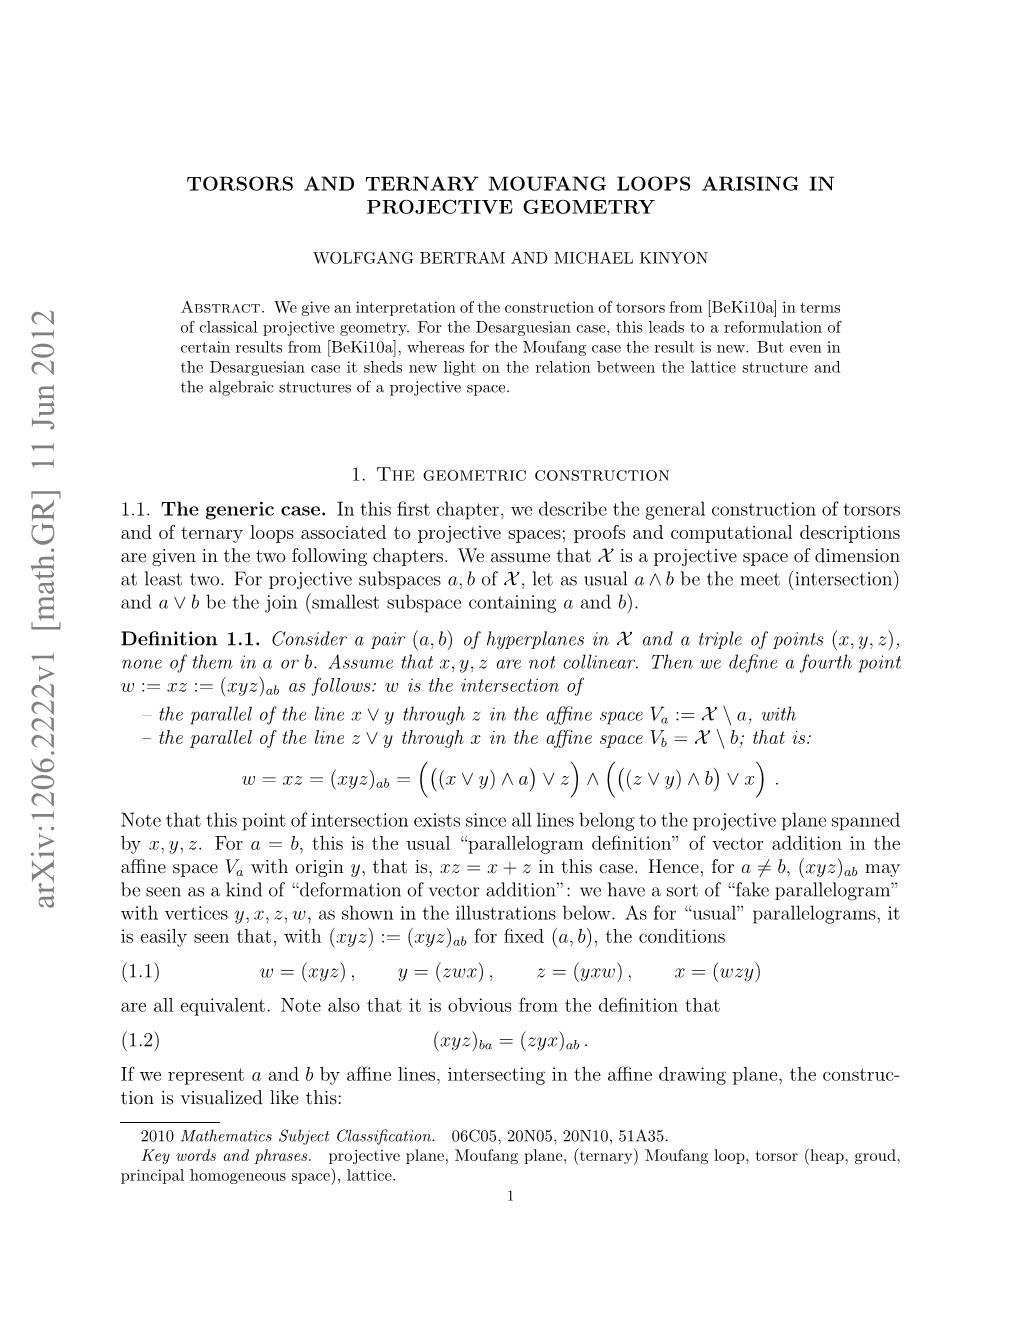 Torsors and Ternary Moufang Loops Arising in Projective Geometry